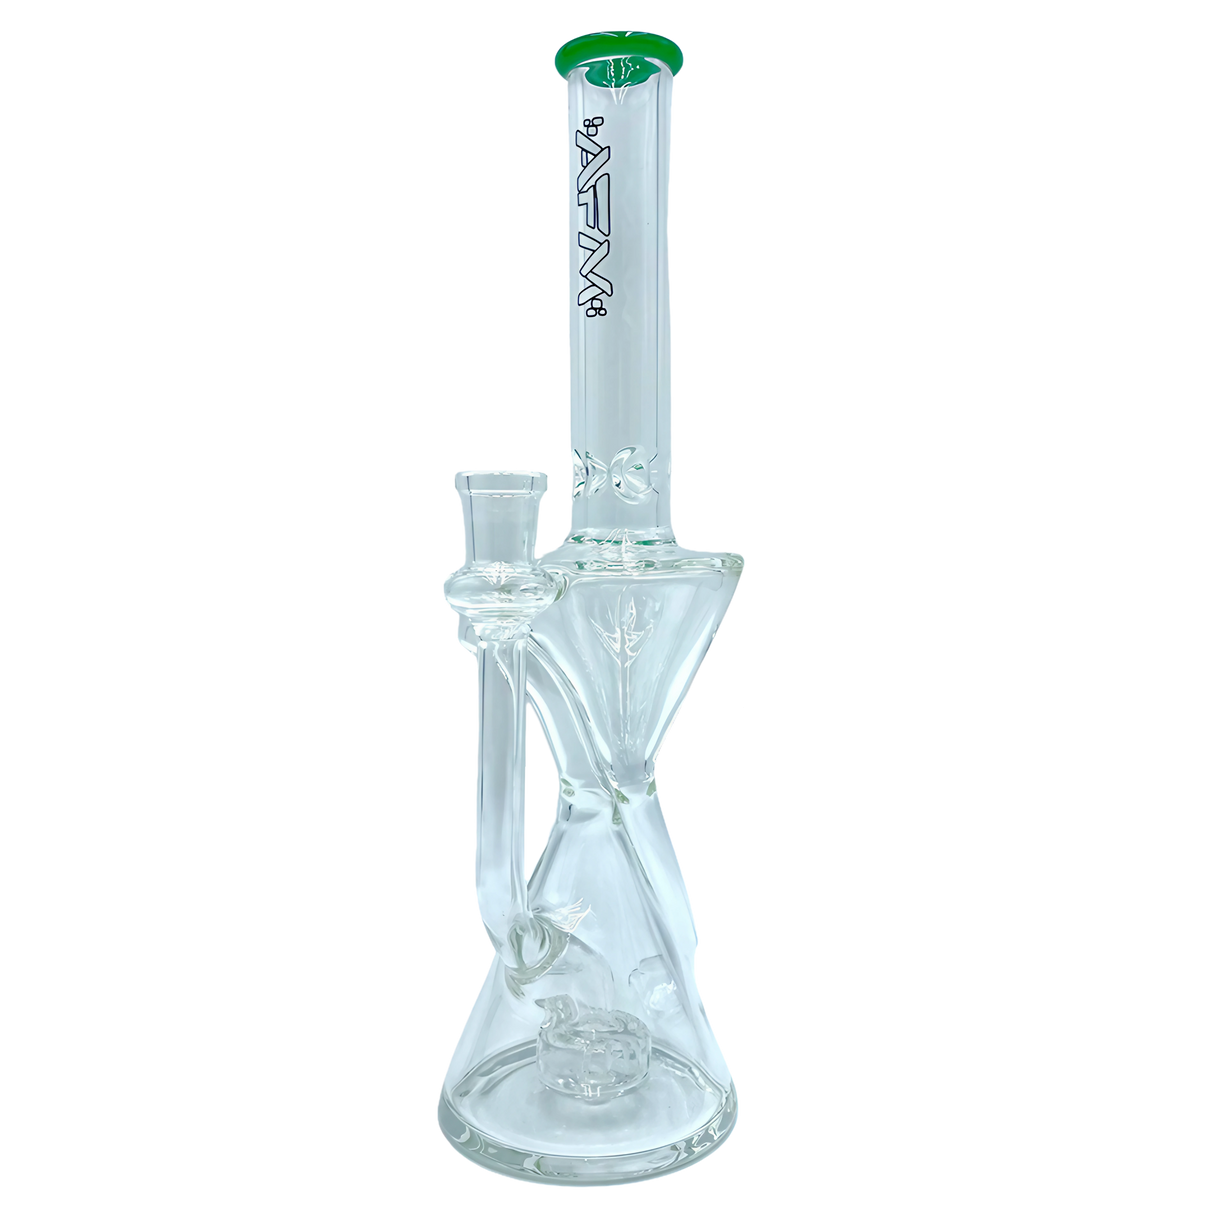 AFM The Time Recycler Rig in Green - 12" Borosilicate Glass with Showerhead Percolator